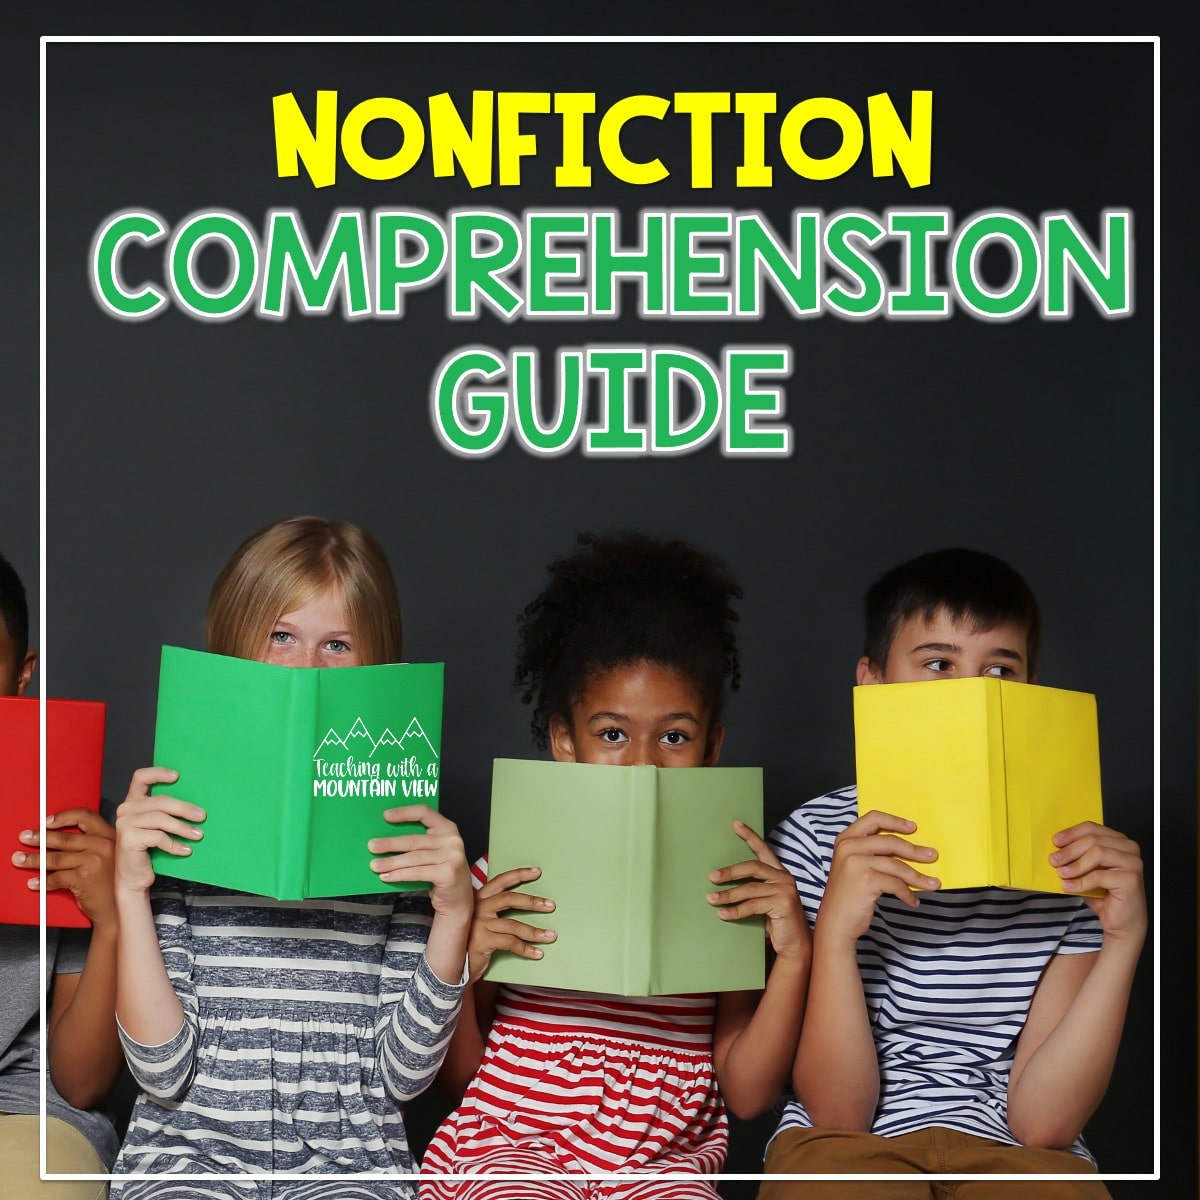 Here are some of the consistent strategies and skills I use in my classroom to help my students master nonfiction comprehension.